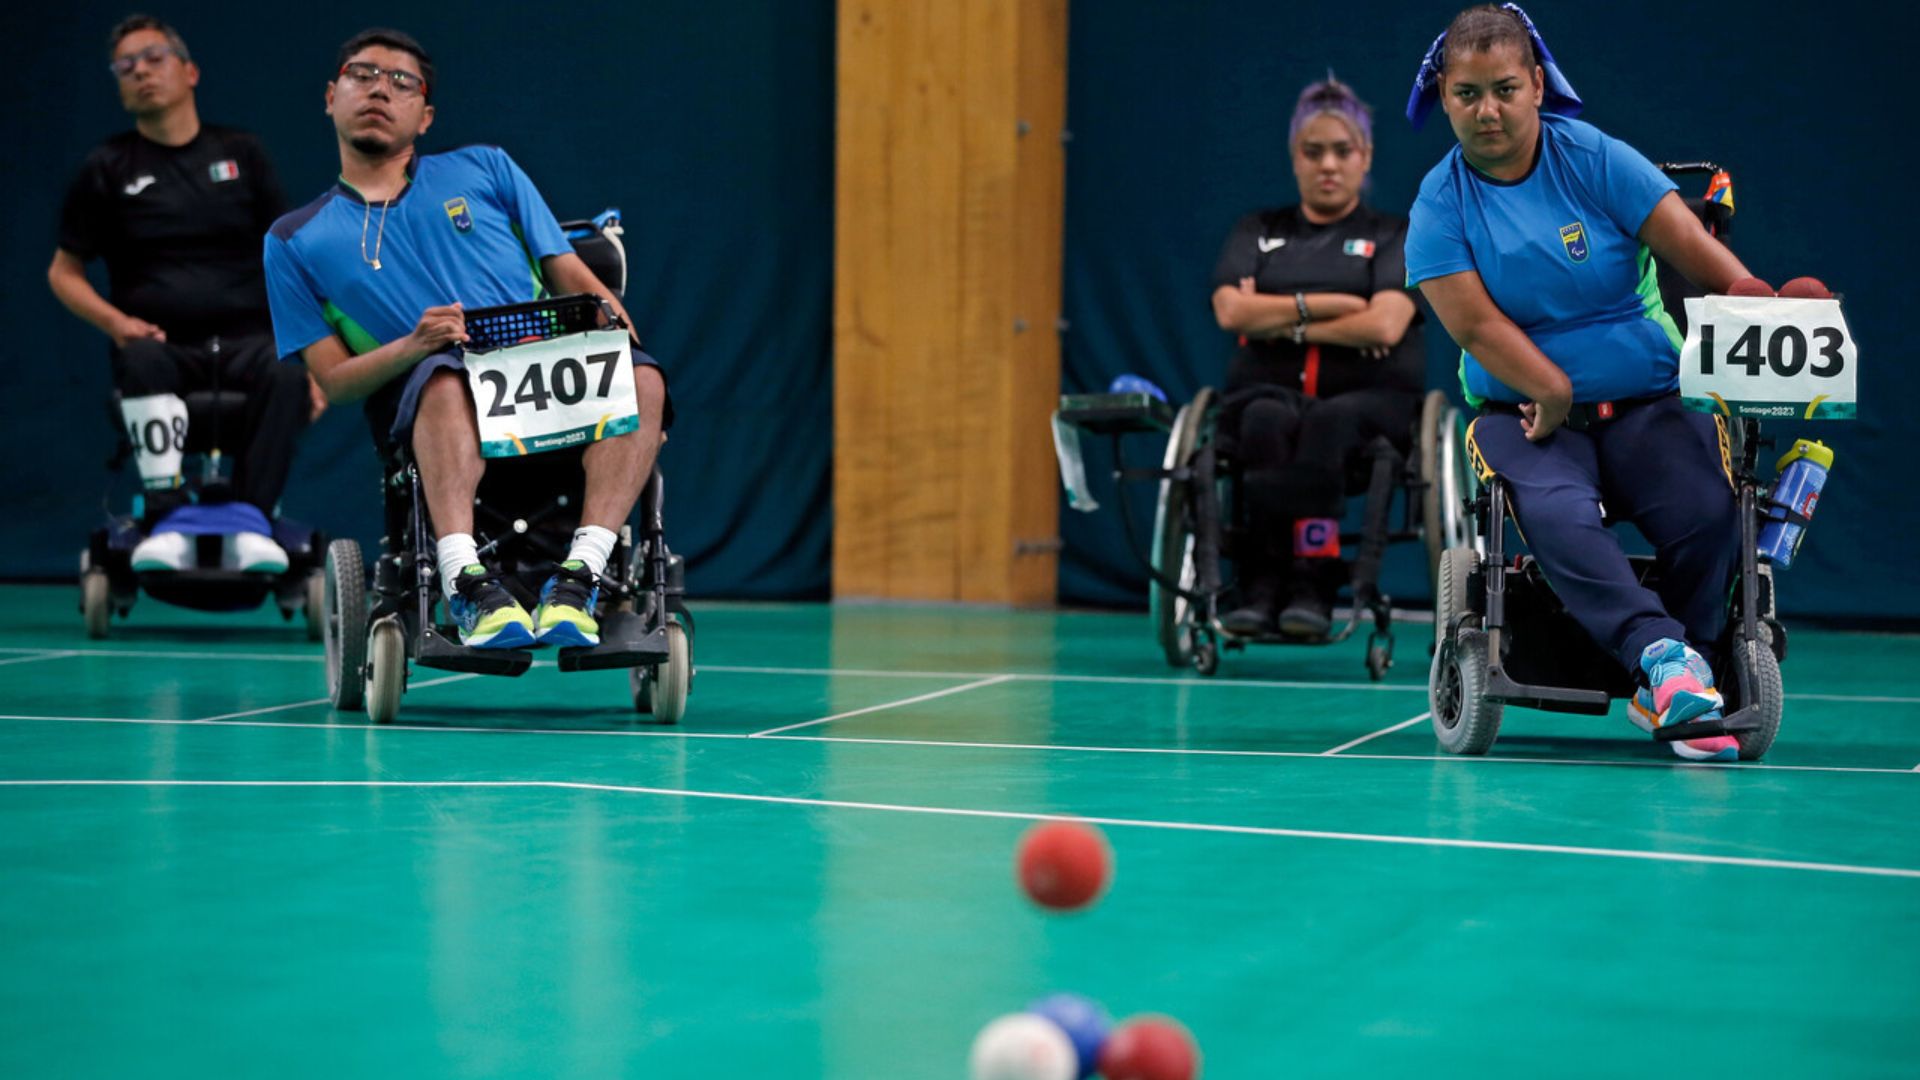 Boccia: Canada Defeats Colombia, Takes Home Gold in BC4 Double